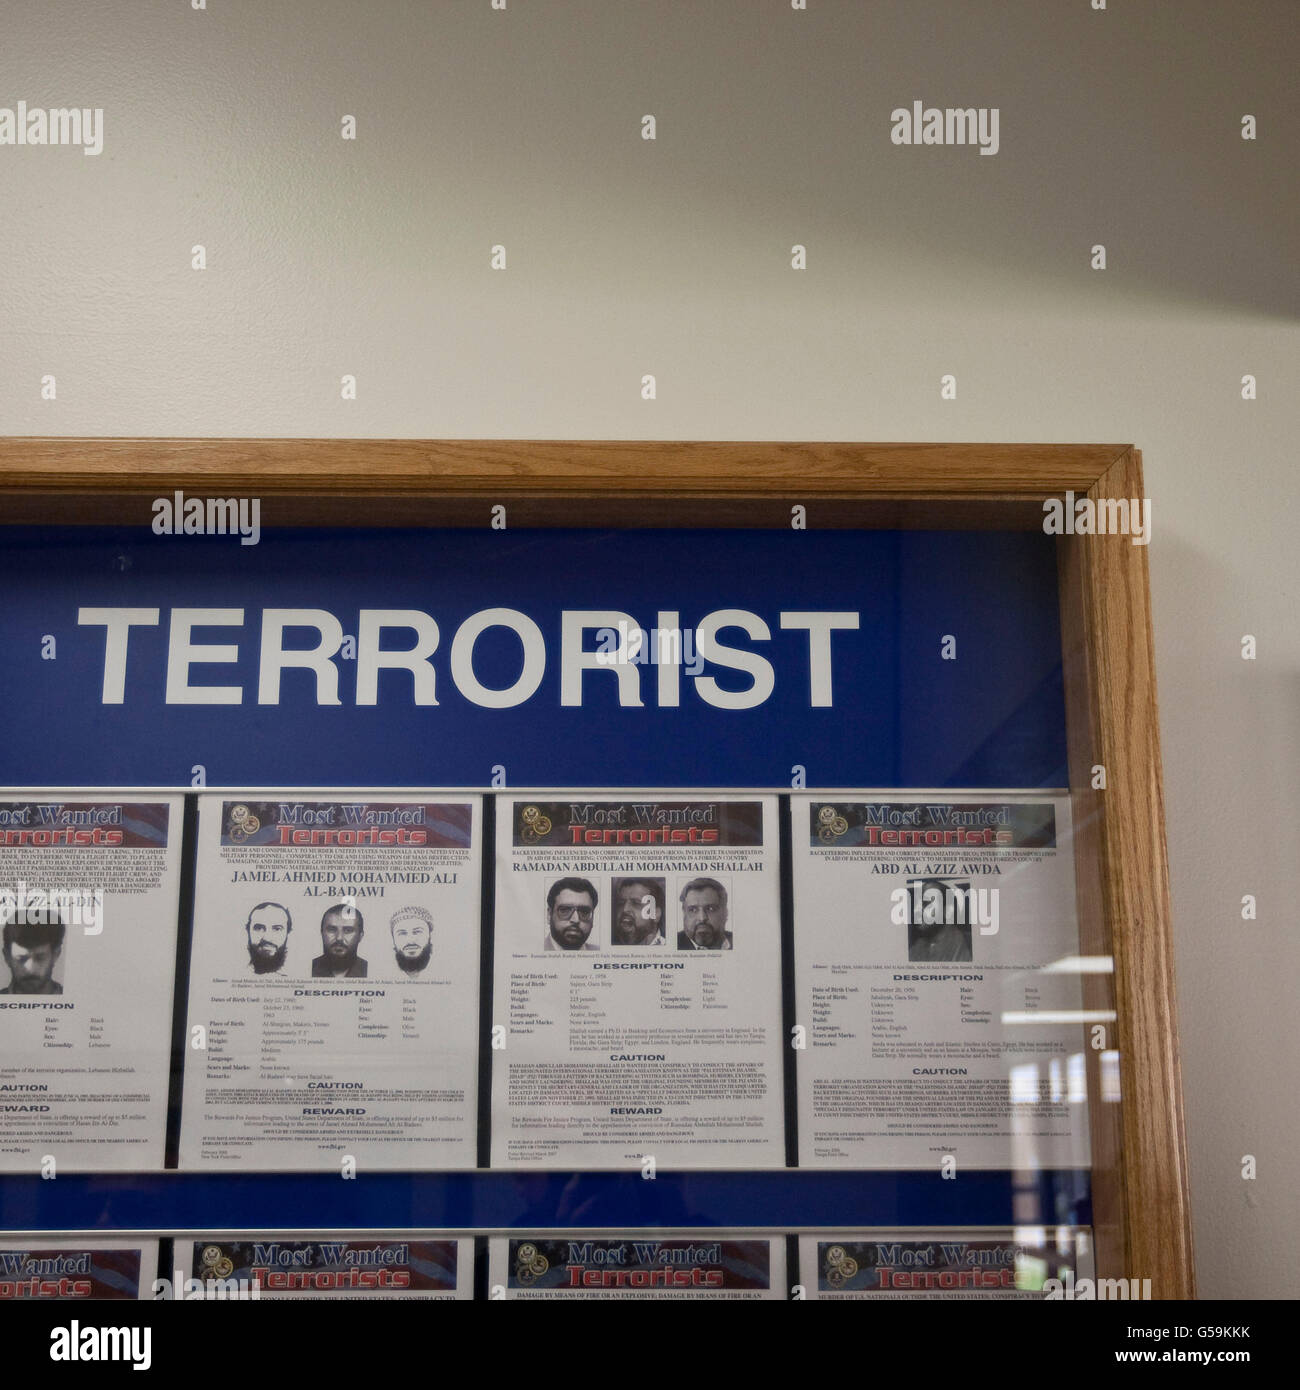 View of a display listing the FBI's most wanted terrorists on a wall at the FBI National Academy in Quantico, VA, USA, 12 May 20 Stock Photo